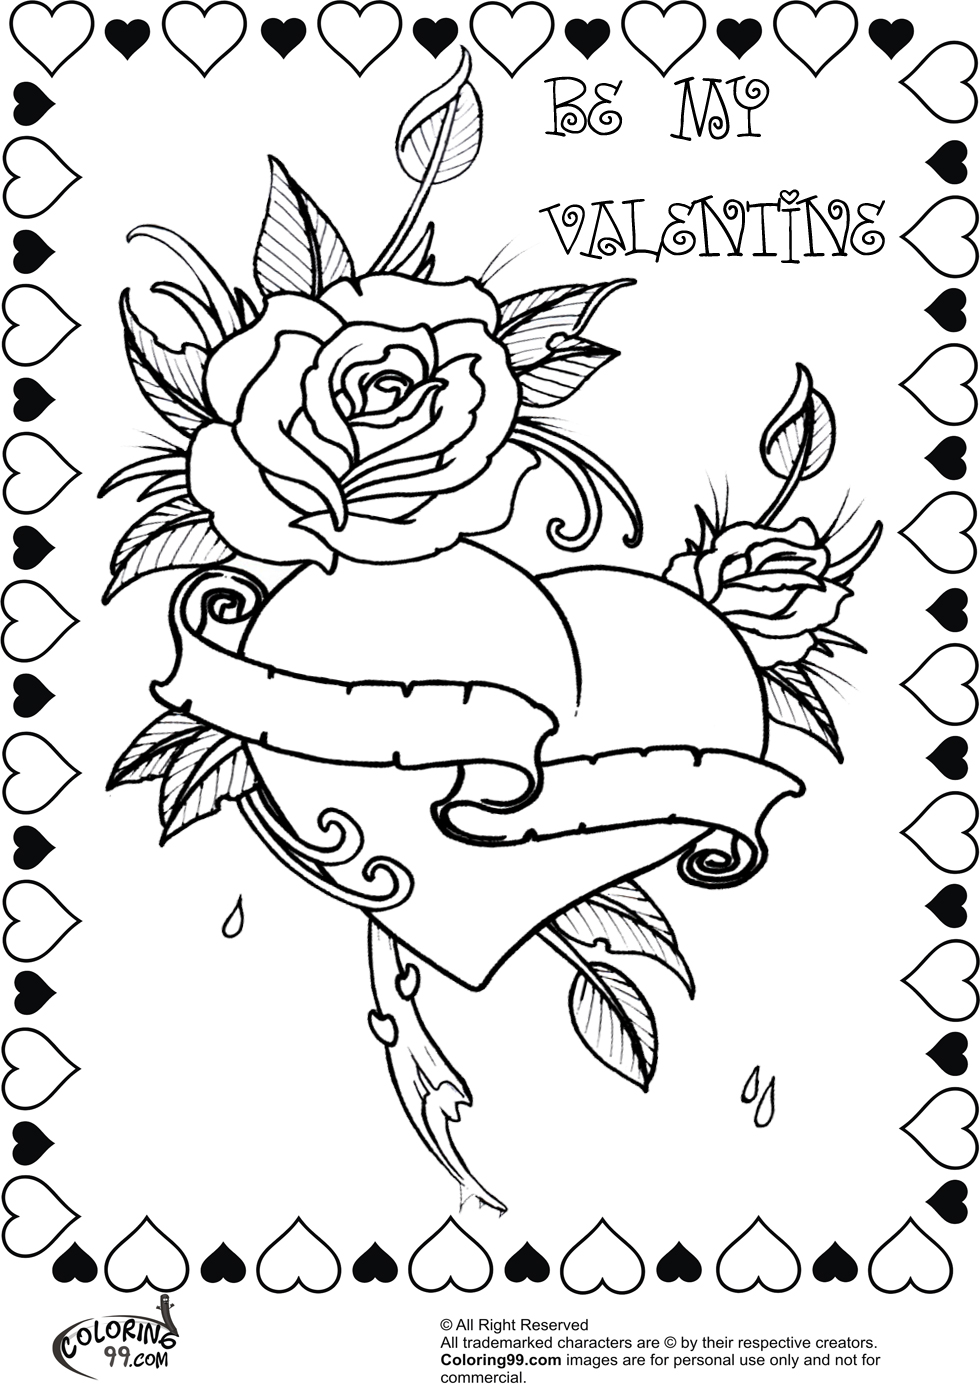 valentines-day-coloring-pages-for-adults-pdf-select-from-35641